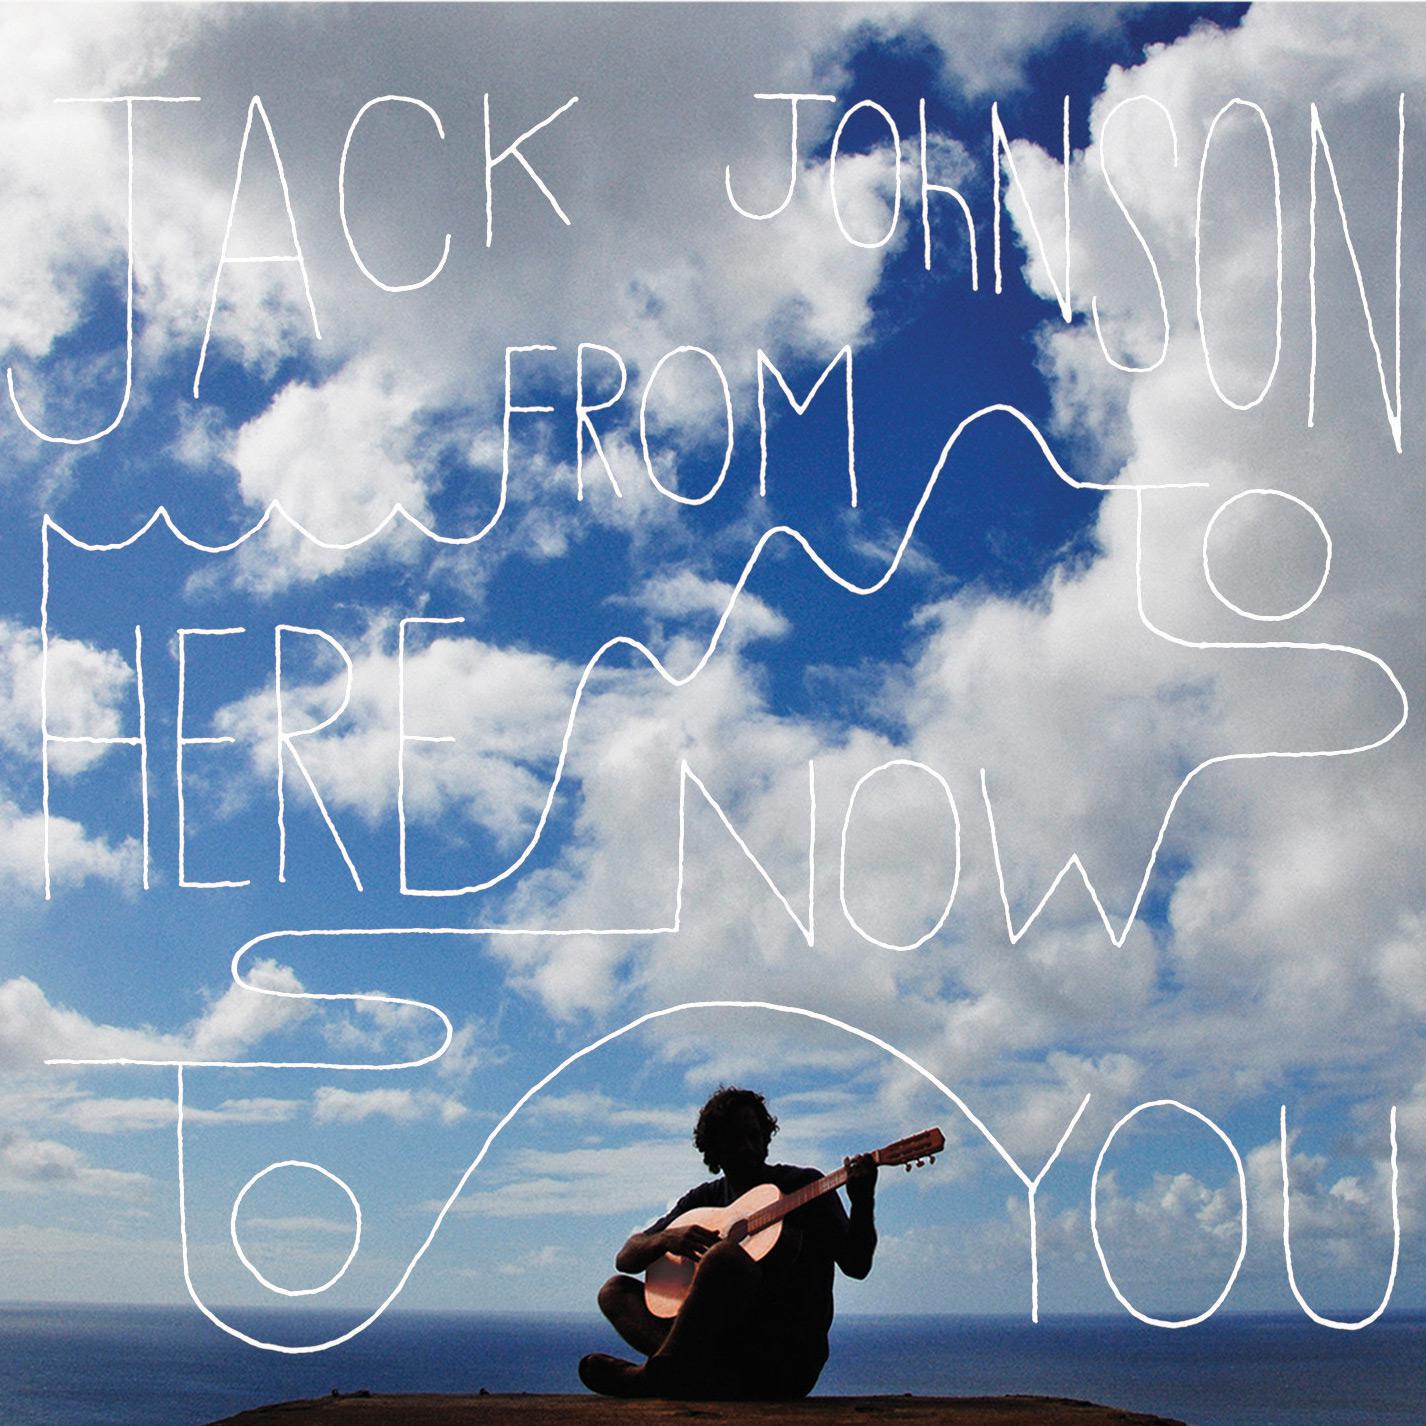 CD Jack Johnson - From Here To Now To You é bom? Vale a pena?